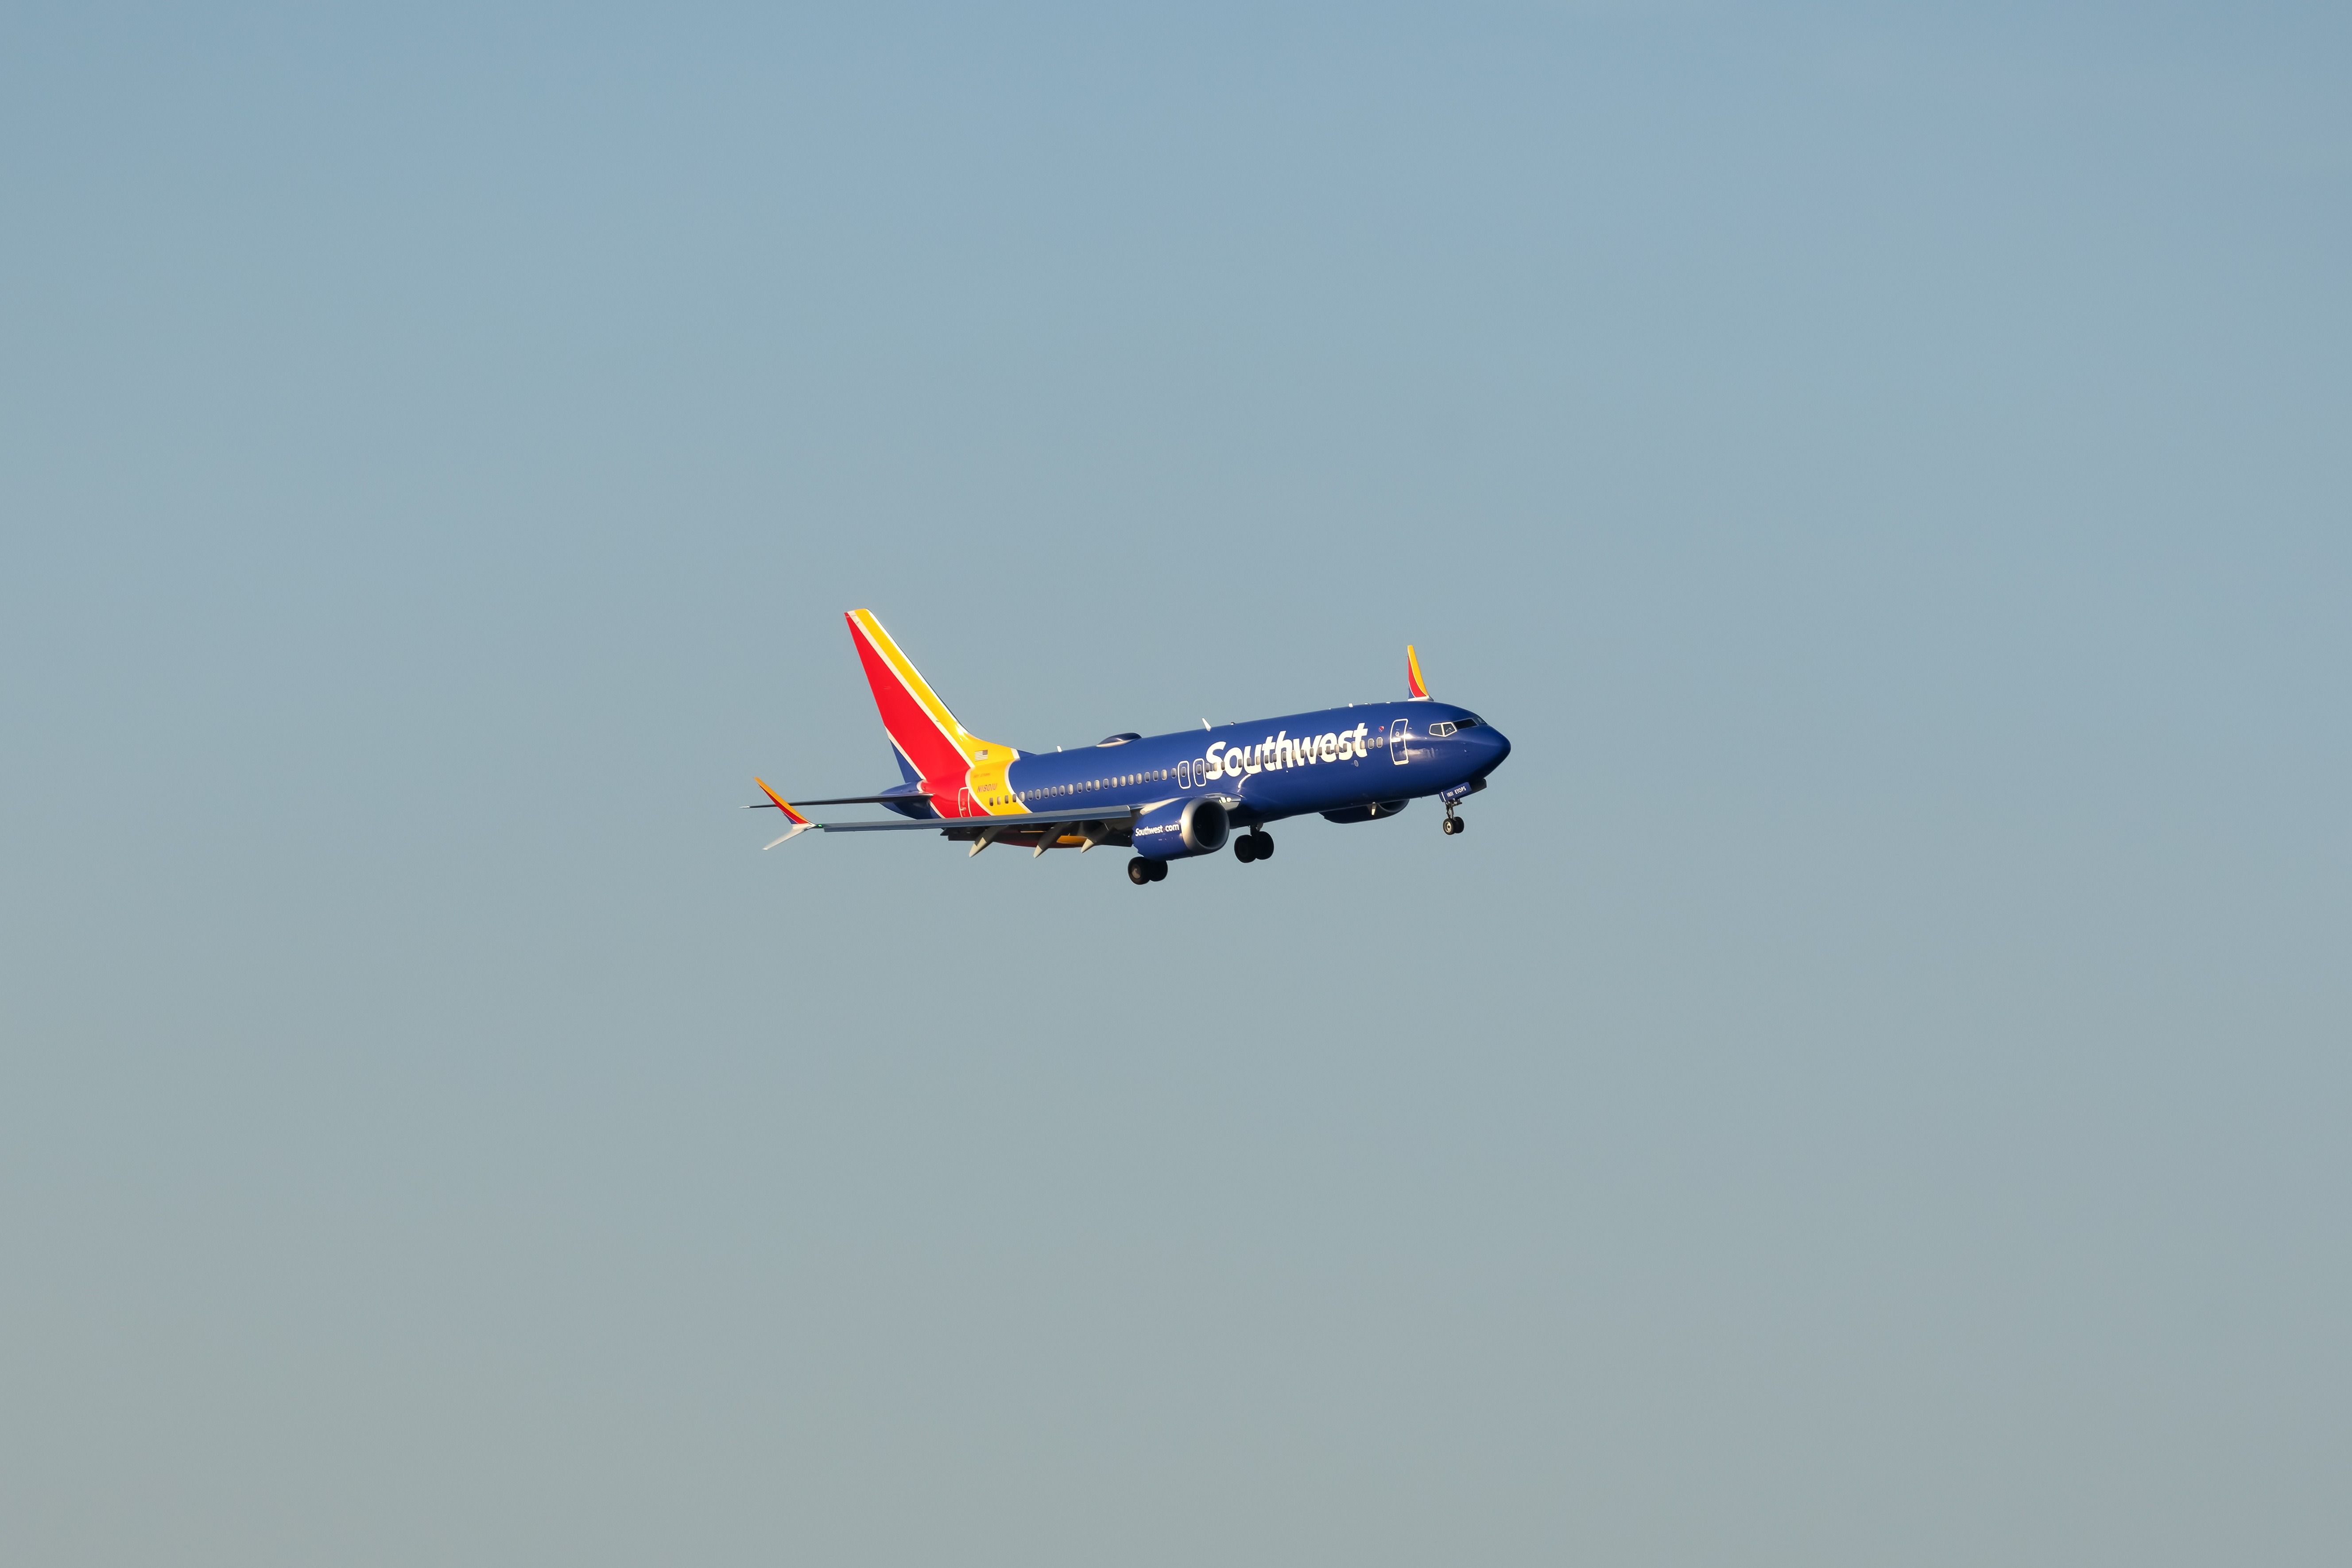 Southwest Airlines Is The World's Largest Airline By ASKs In 2023